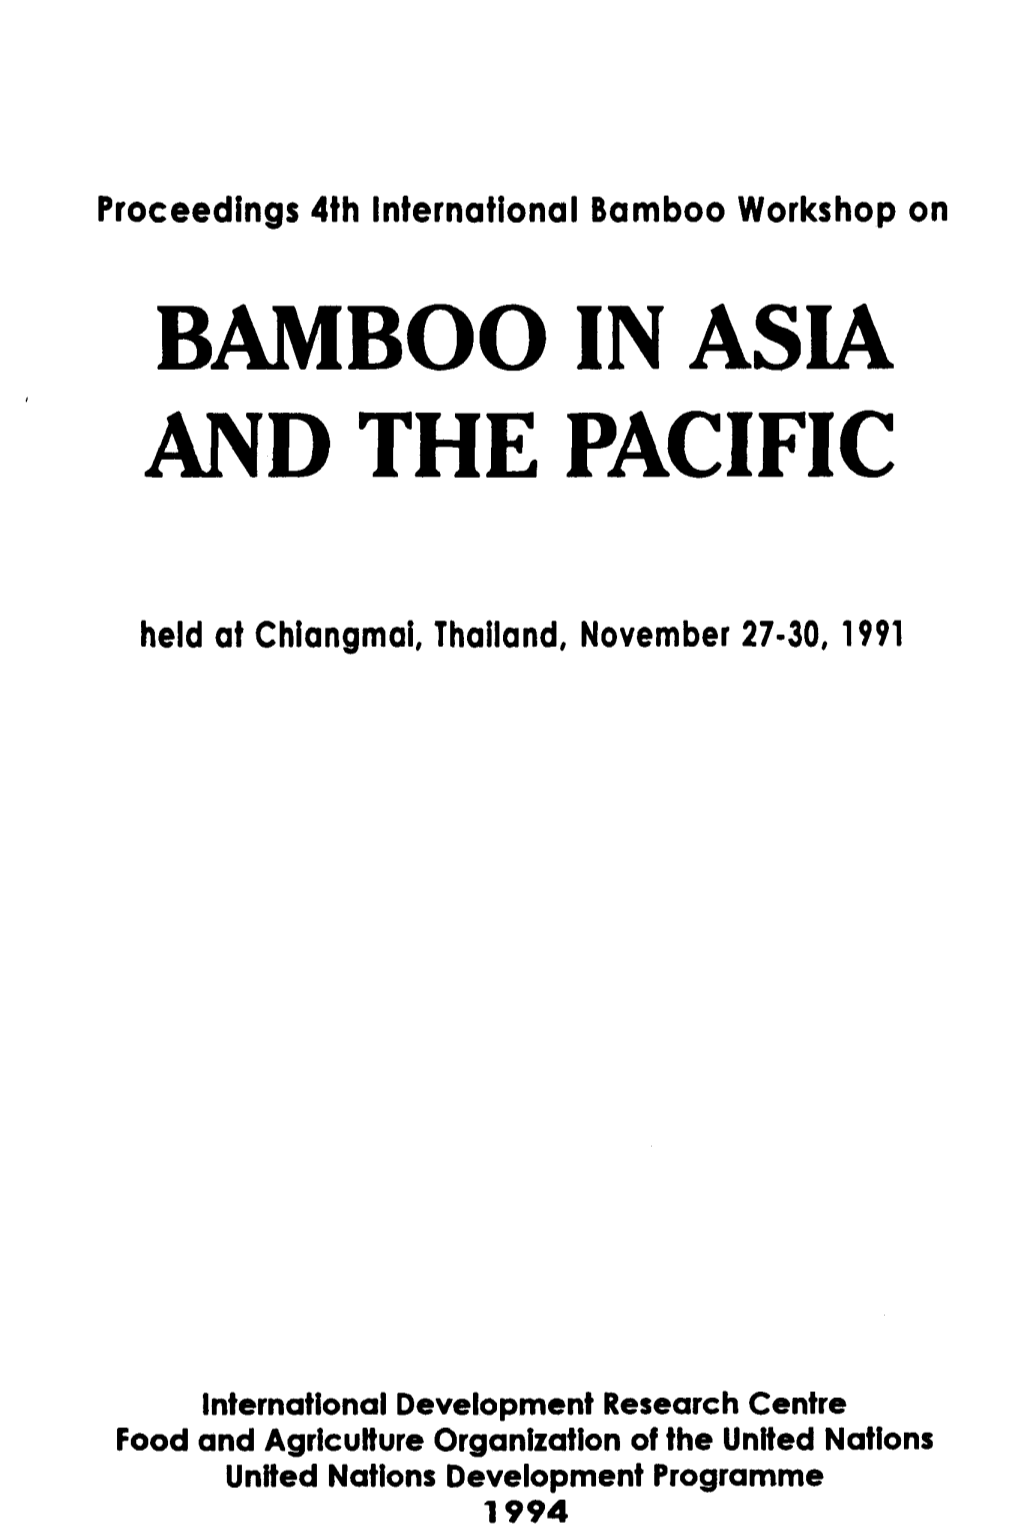 Bamboo in Asia and the Pacific